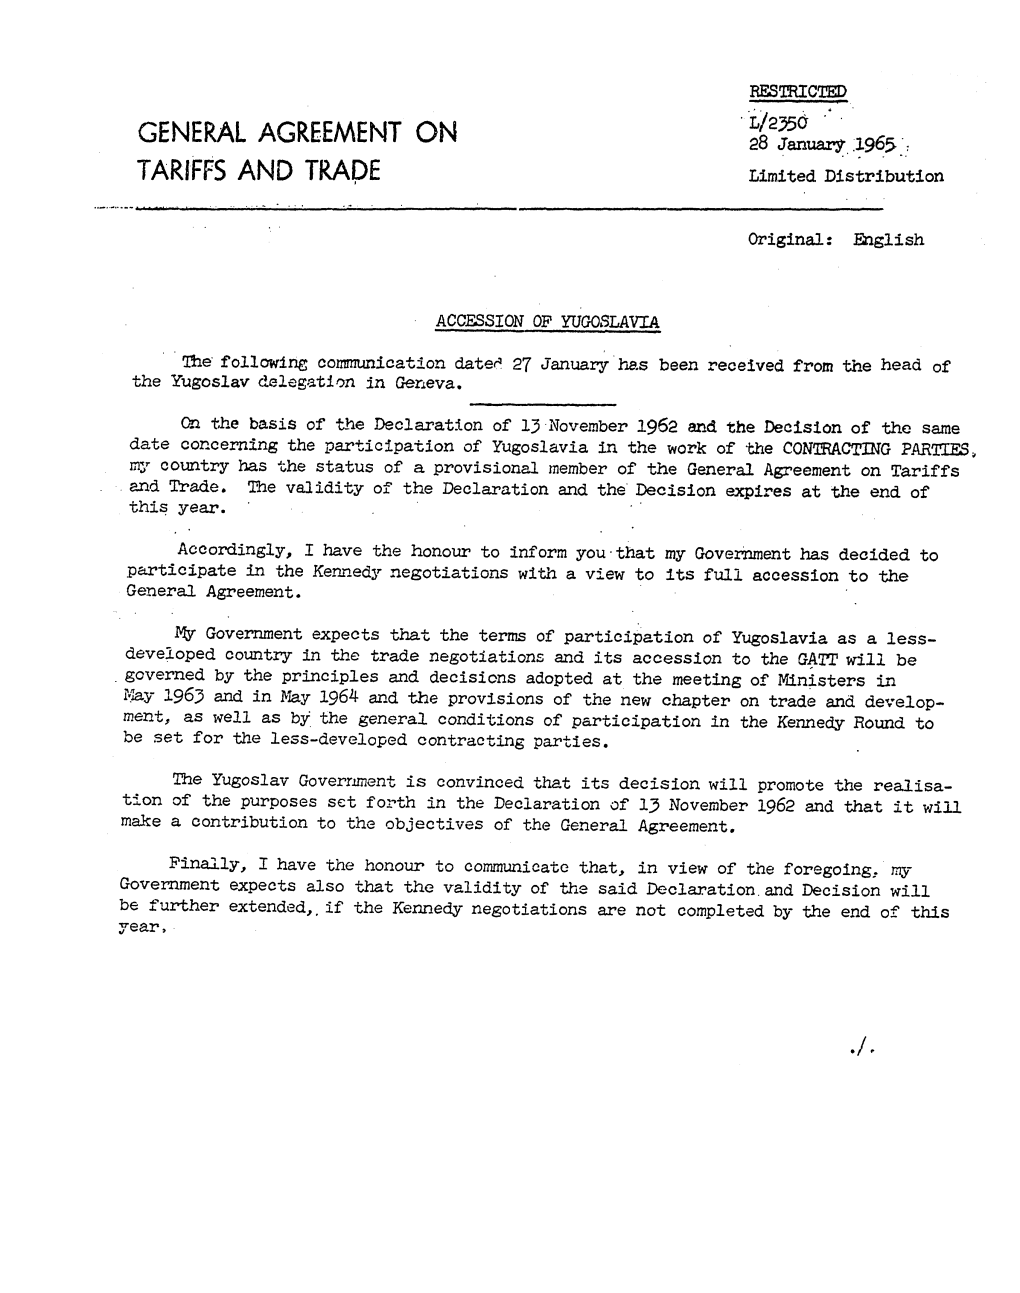 28 January 1965 TARIFFS and TRADE Limited Distribution